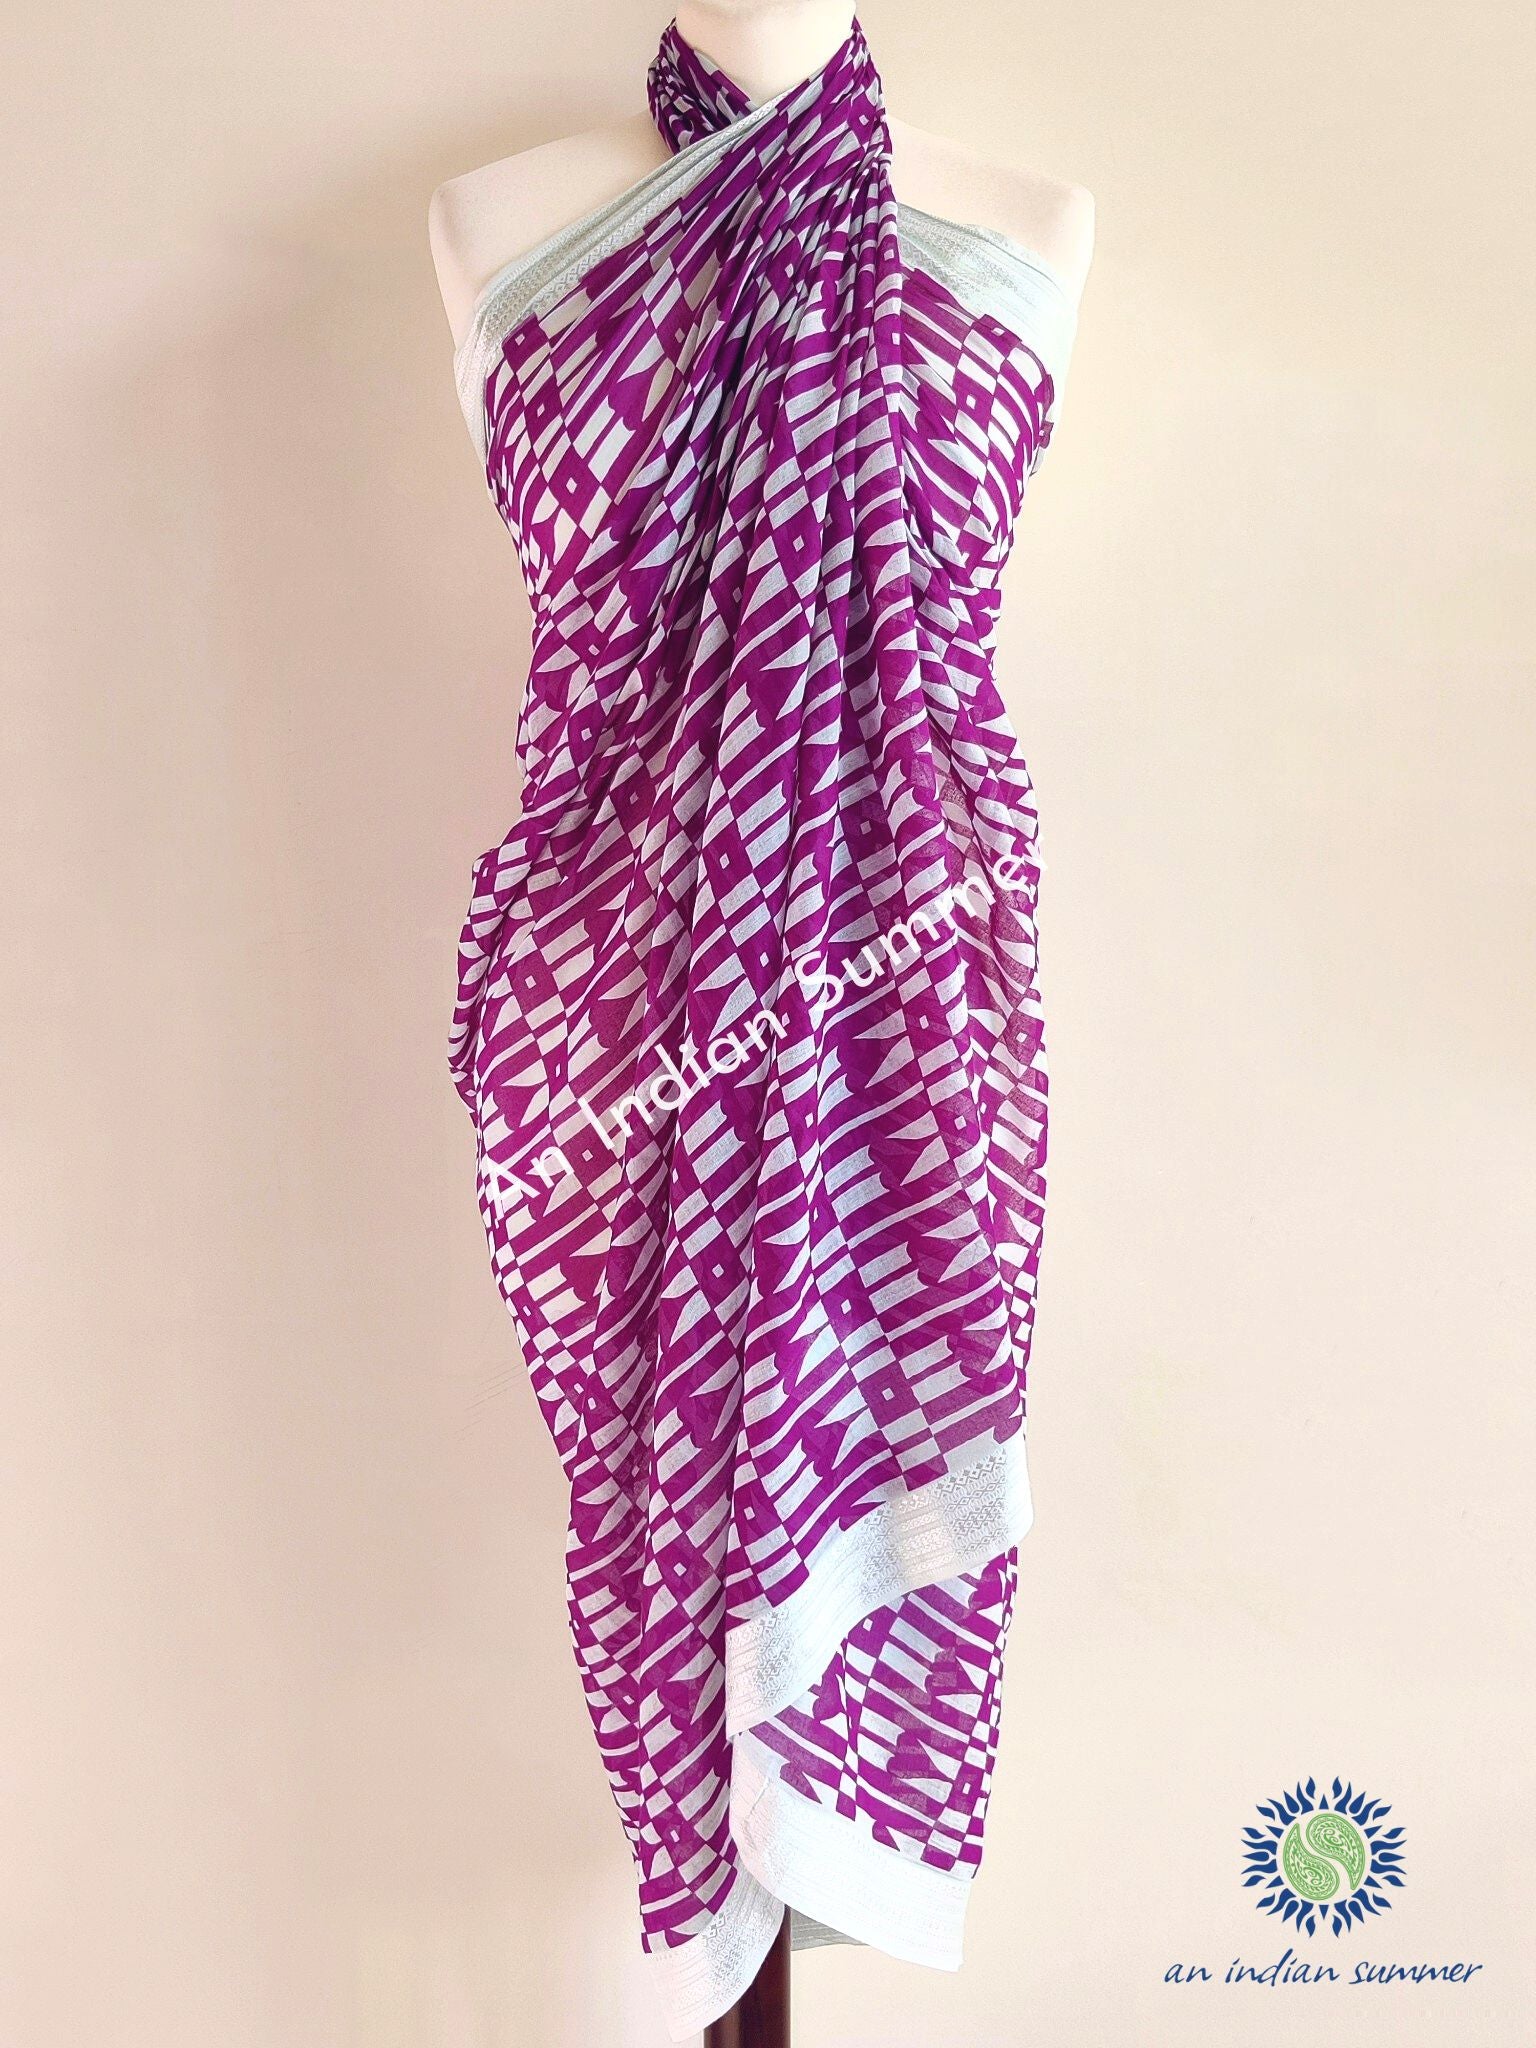 Hearts Woven Border Sarong Pareo | Magenta | Hand Block Printed | Soft Cotton Voile | An Indian Summer | Seasonless Timeless Sustainable Ethical Authentic Artisan Conscious Clothing Lifestyle Brand